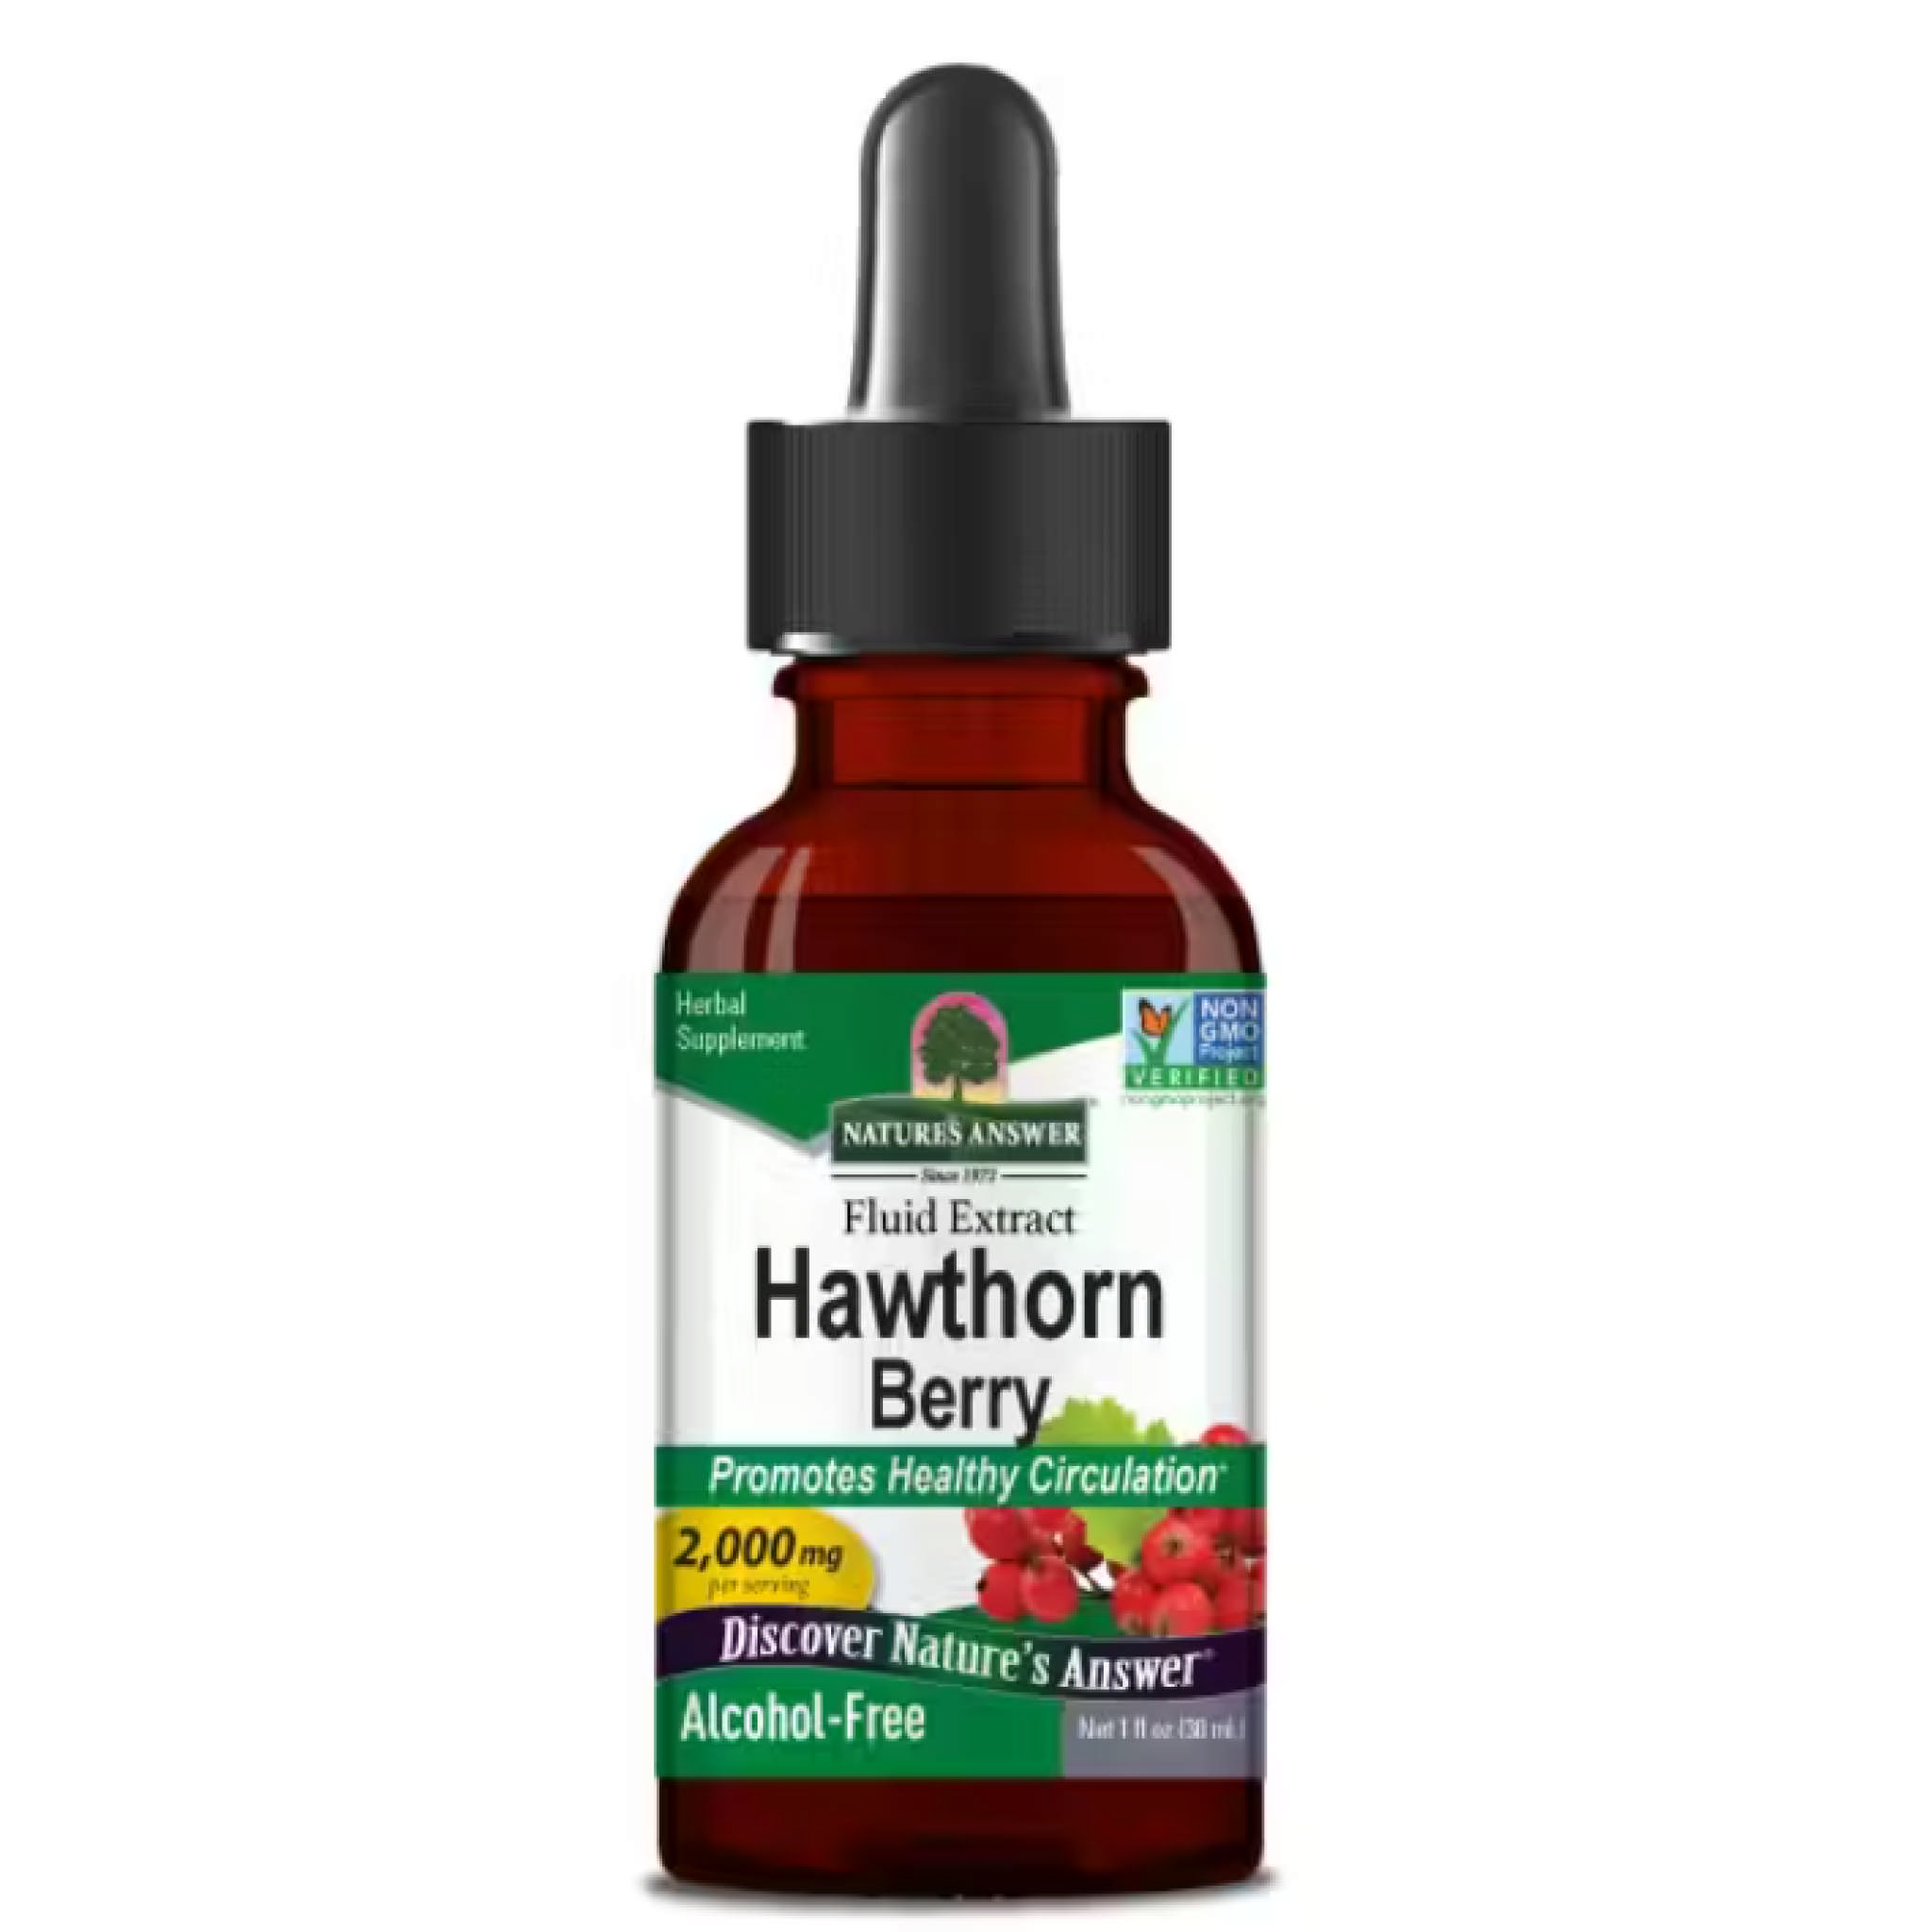 Natures Answer - Hawthorn Berry A/F